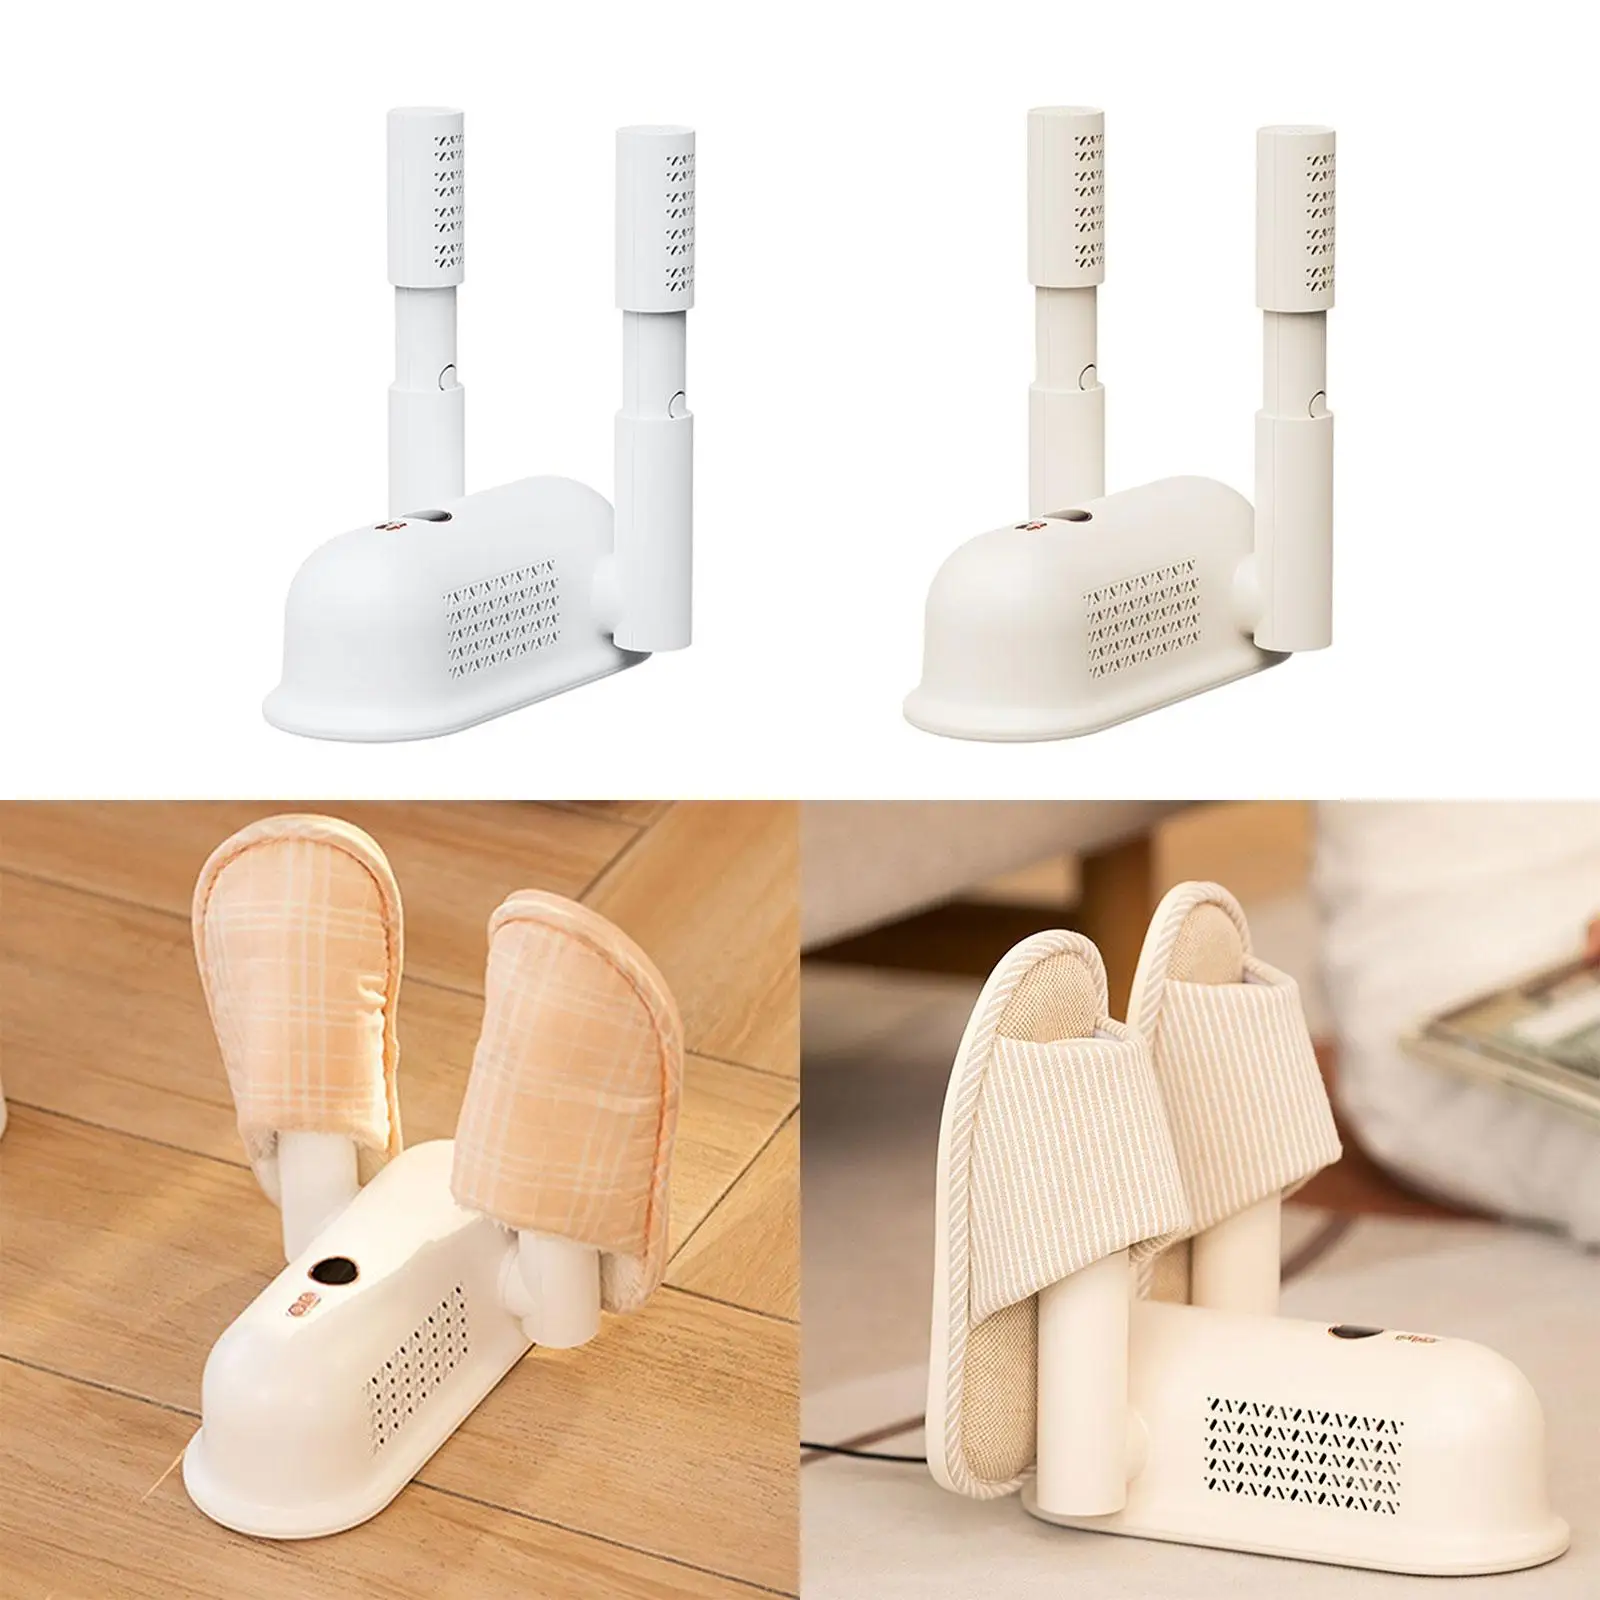 Household Shoe Dryer Heater Quick Drying Portable Glove Dryer Shoes Warmer Boot Dryer for Socks Winter Dormitory Snow Boots Home